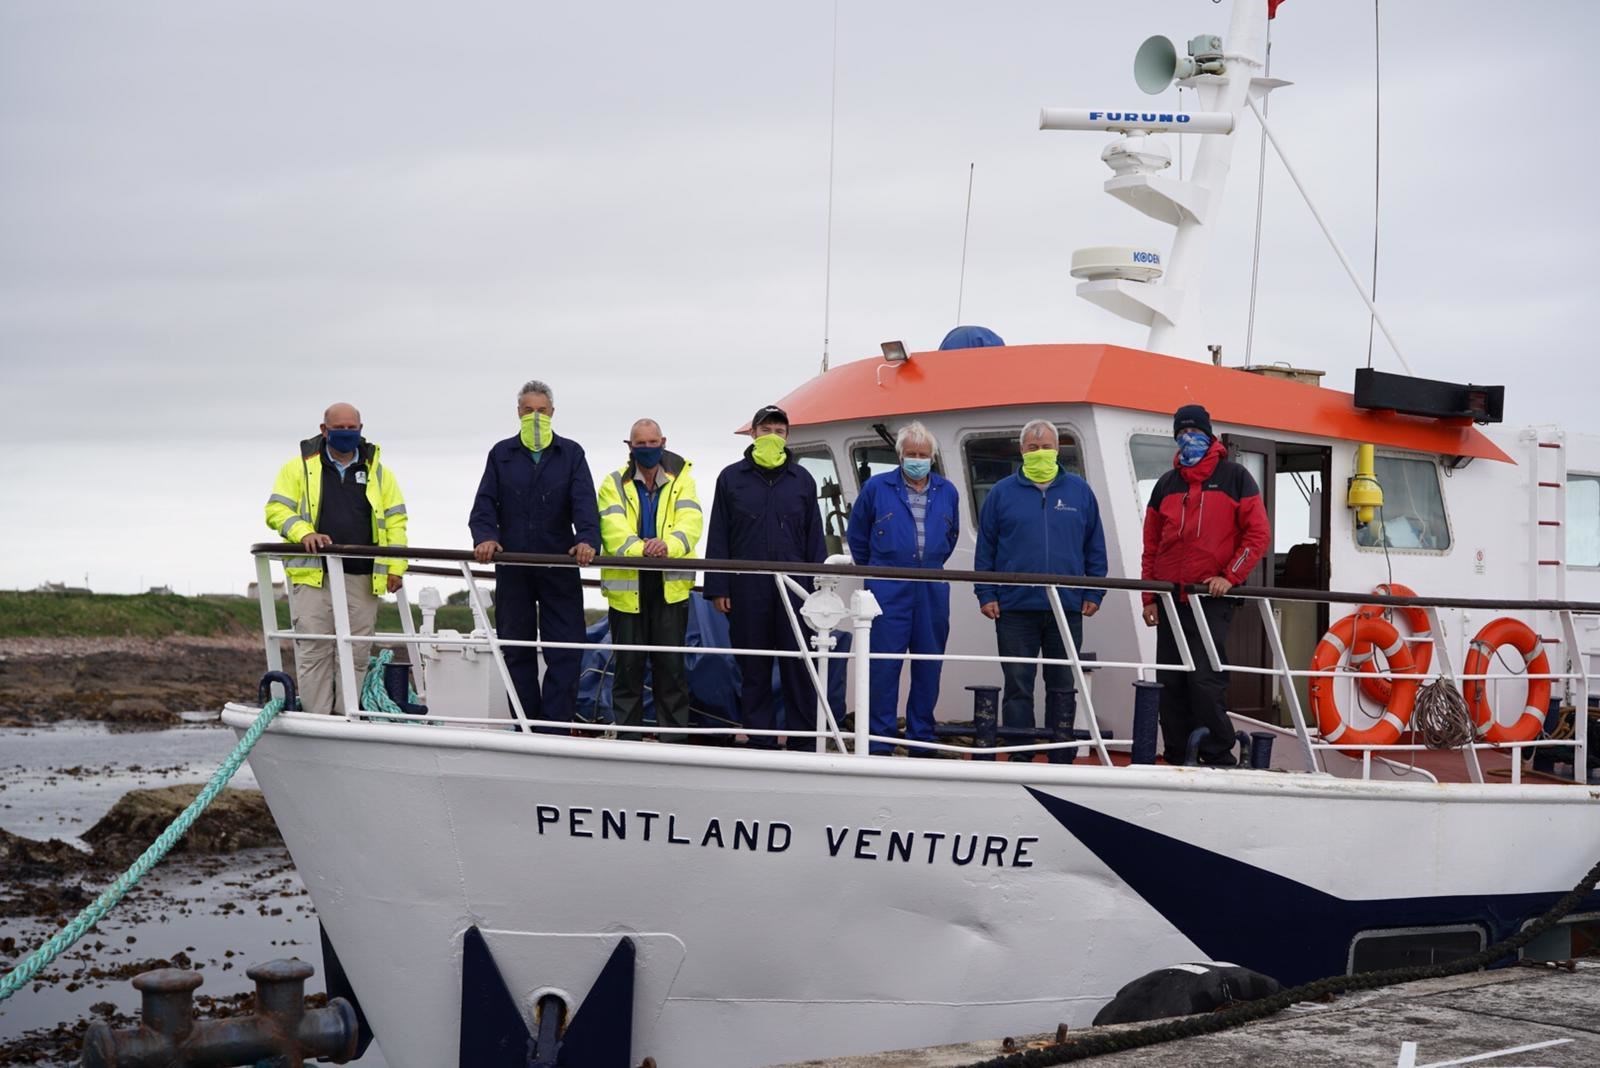 Steve Truluck (right) with staff of John O’Groats Ferries on the Pentland Venture during Orca Watch 2021.